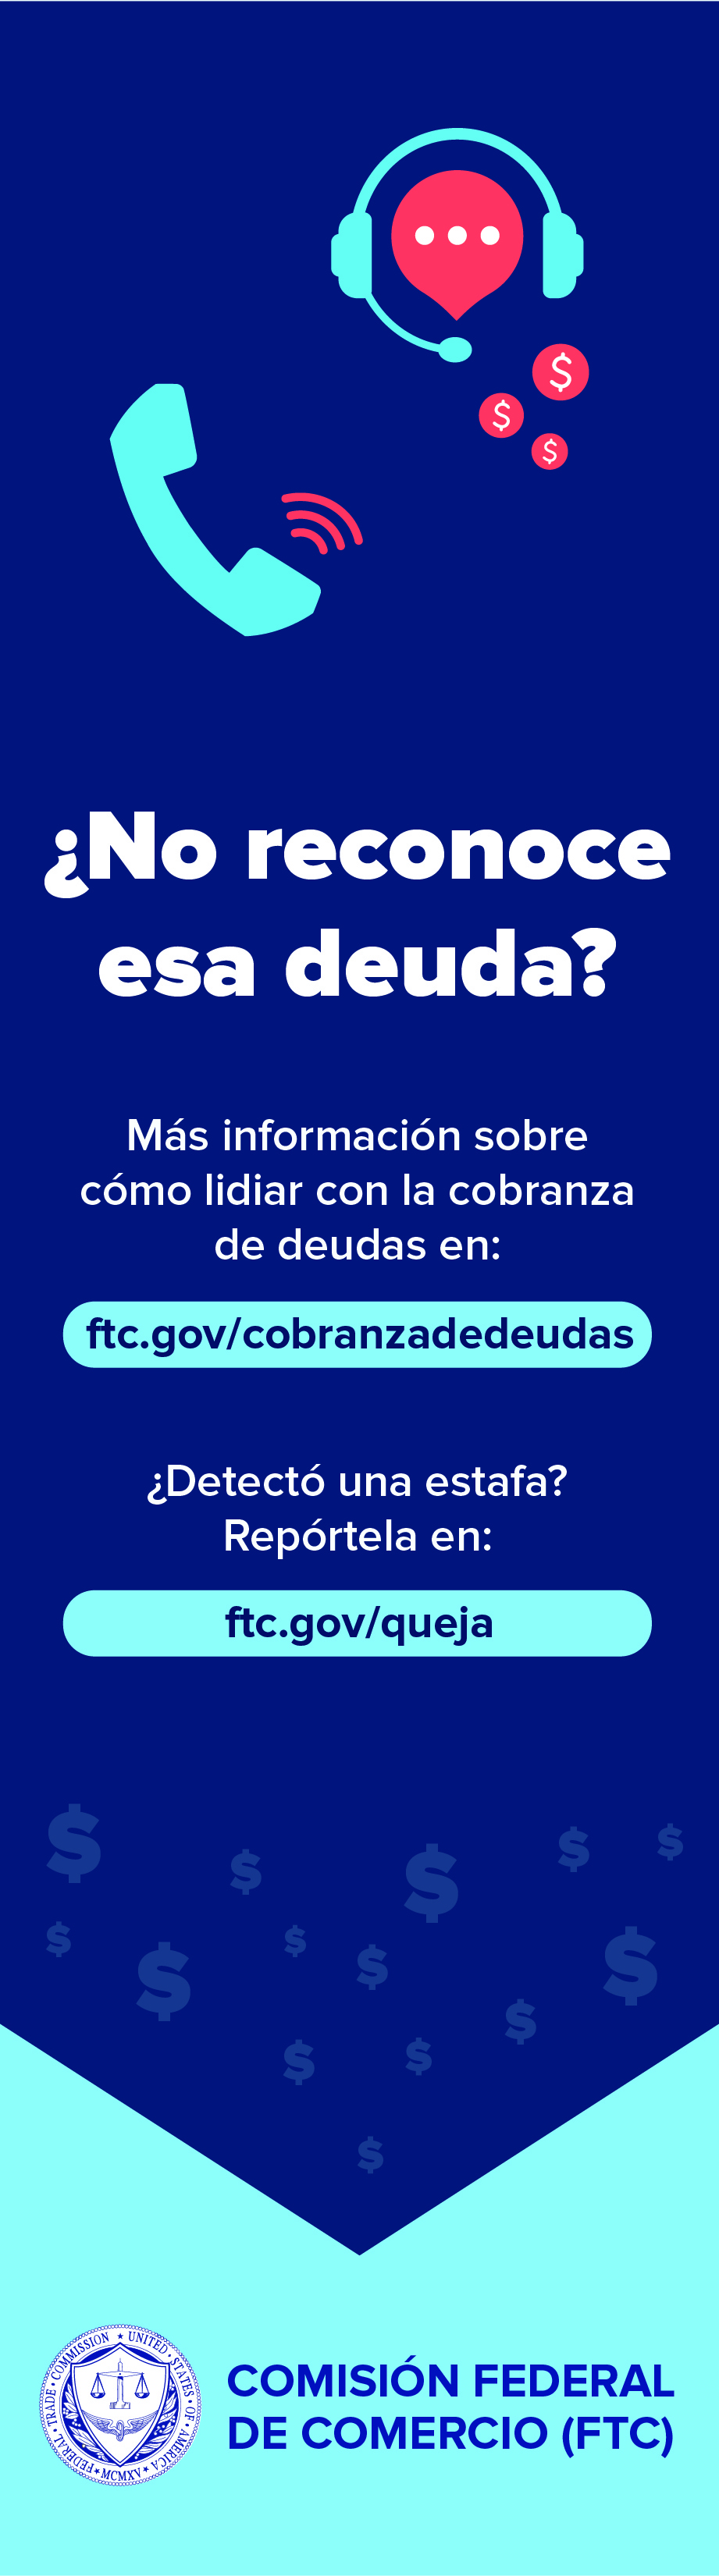 Don't recognize that debt? Learn more about dealing with debt collection at: ftc.gov/debtcollection. Spot a scam? Report it to: ftc.gov/complaint